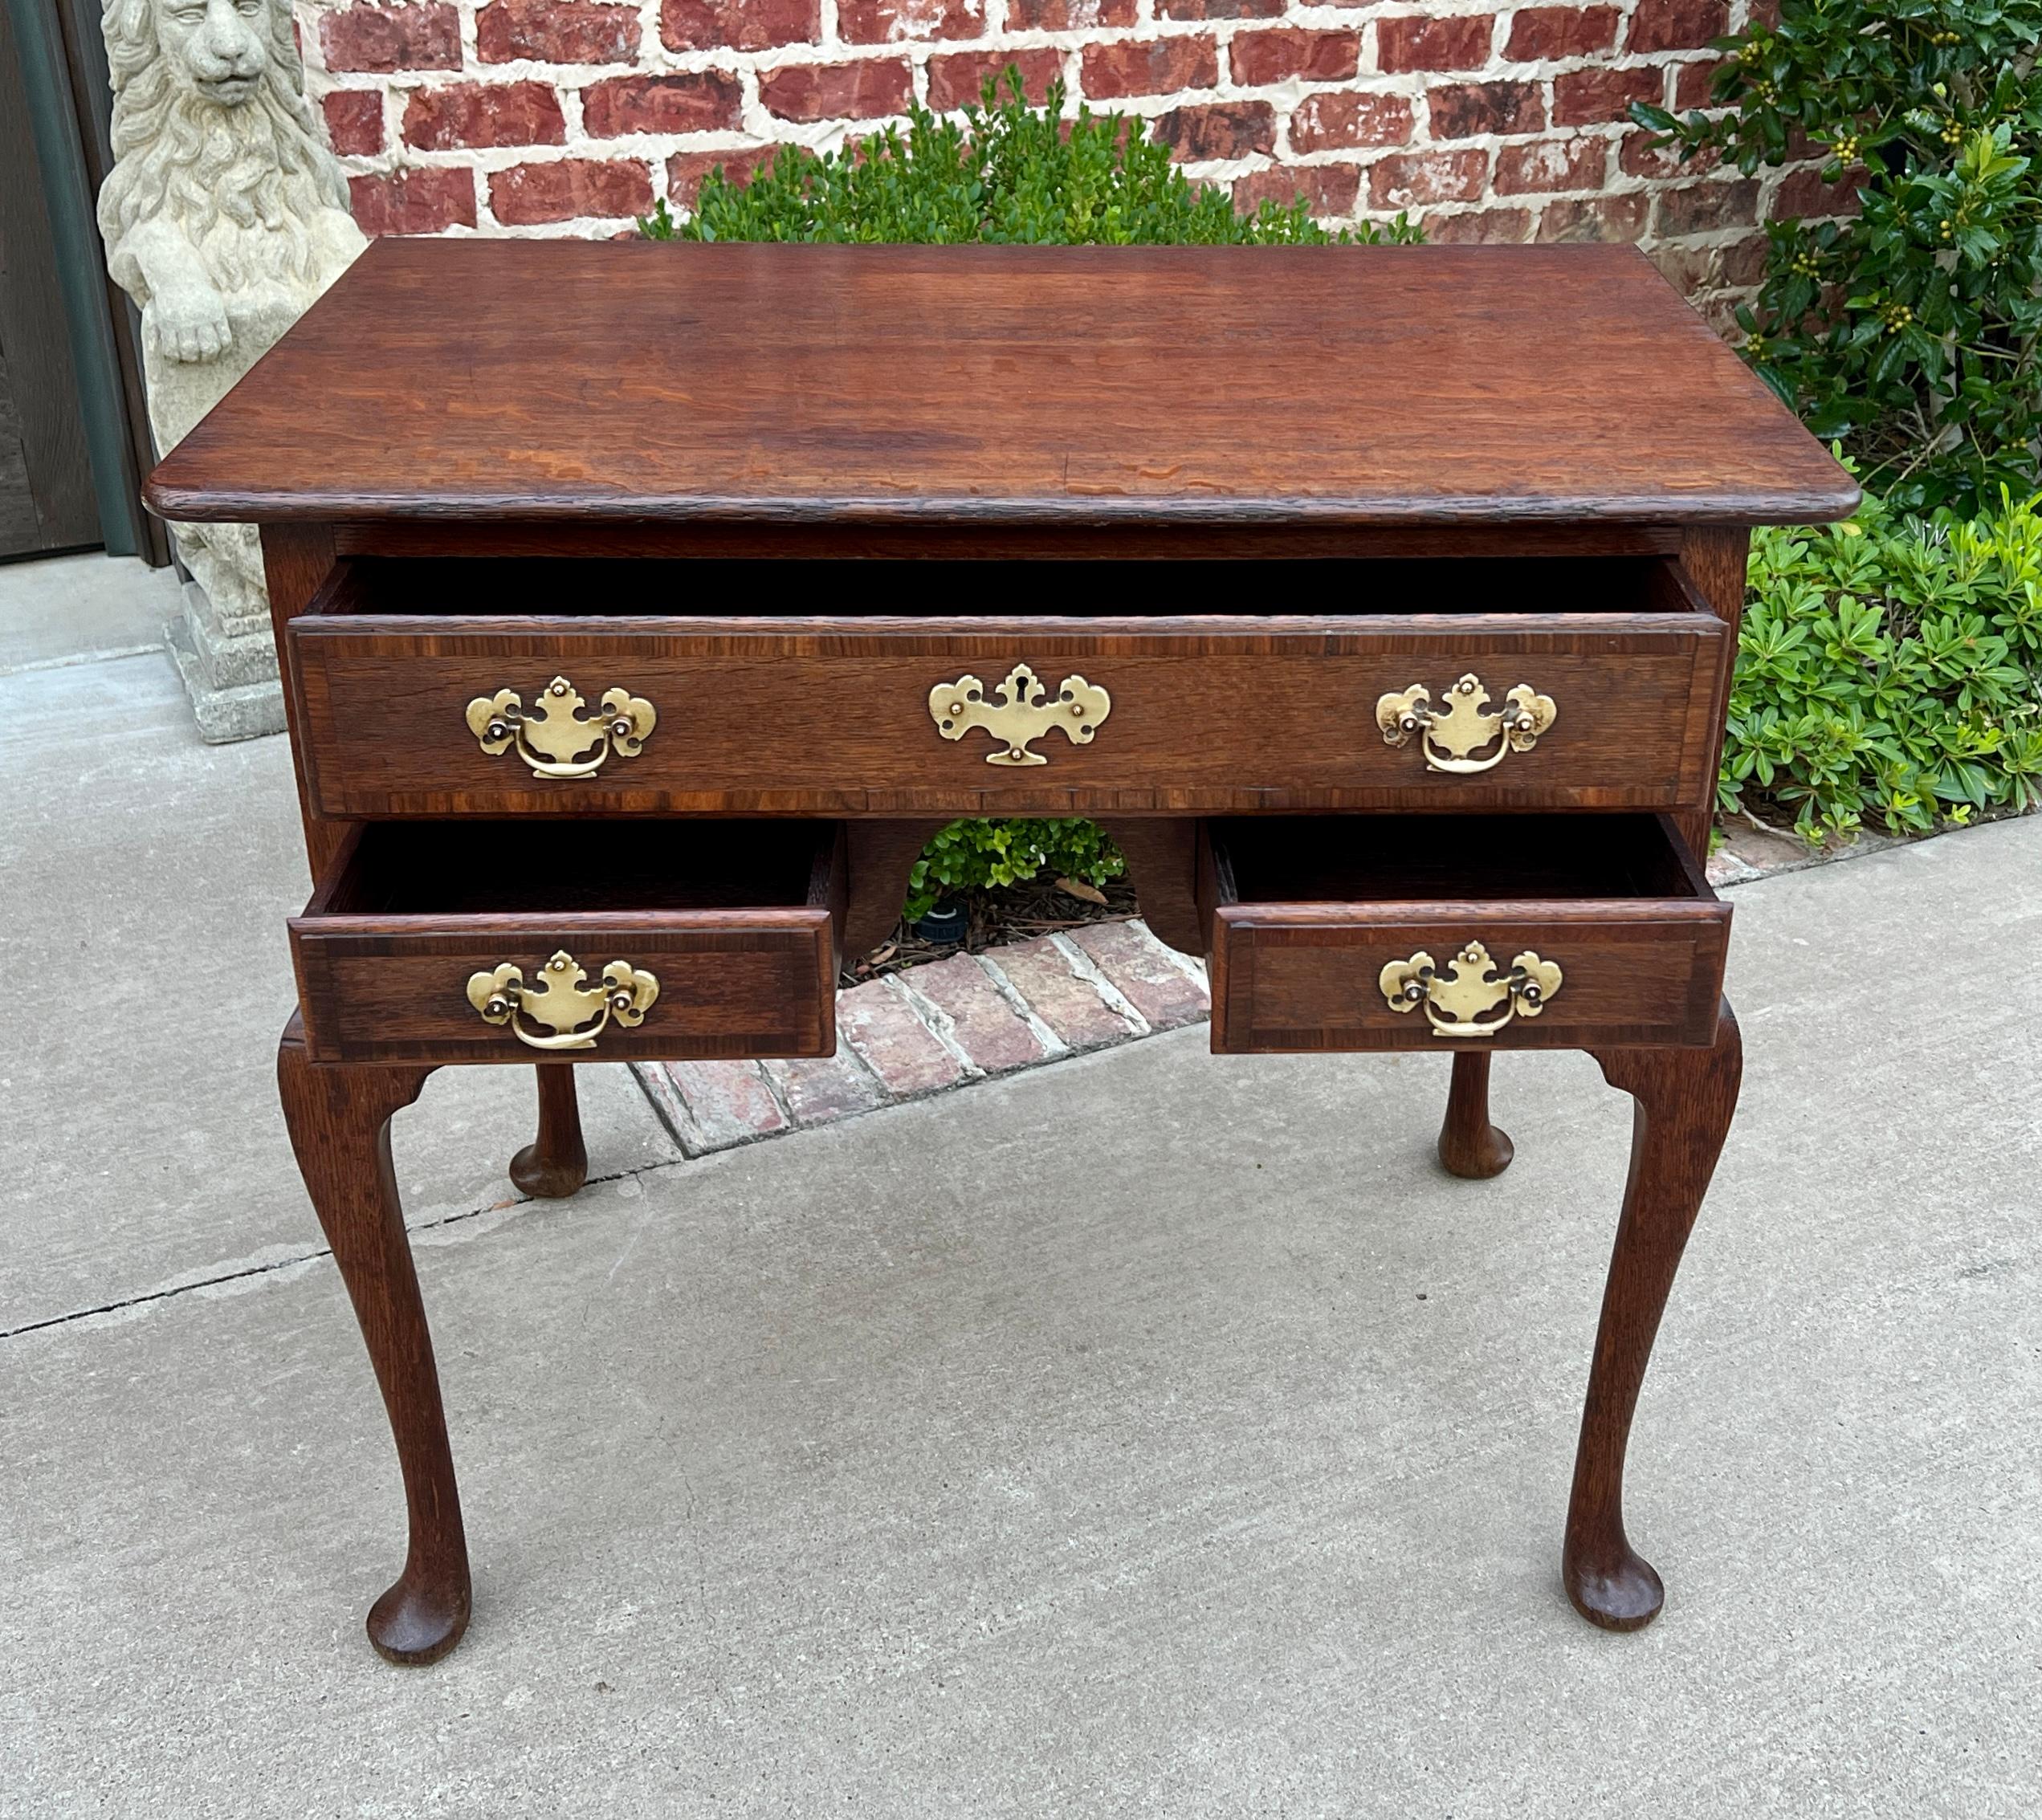 Carved Antique English Georgian Table Small Desk Nightstand Lowboy 3 Drawers Tiger Oak For Sale